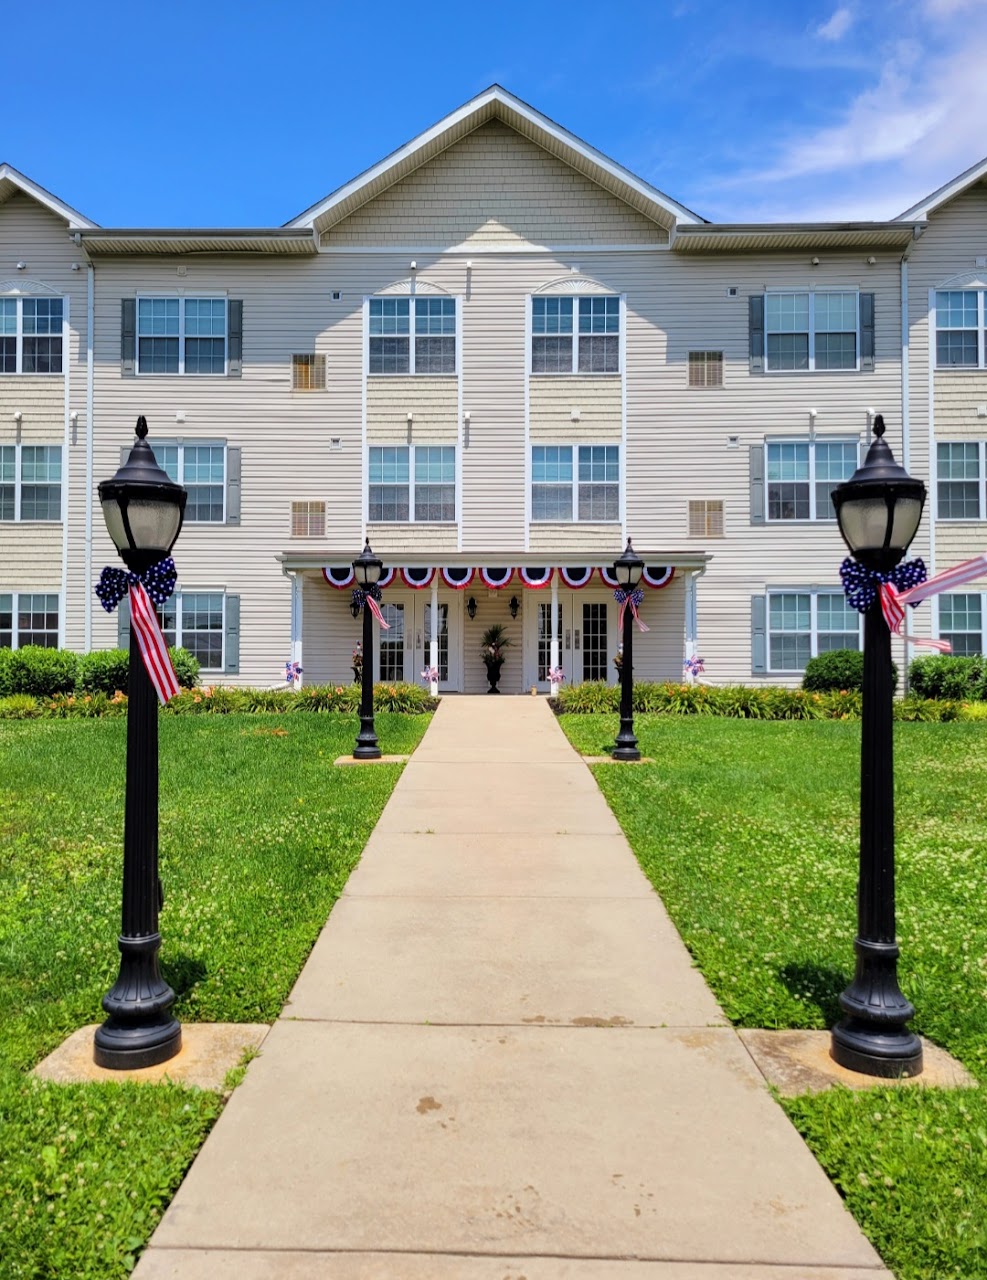 Photo of BELLMAWR SENIOR HOUSING. Affordable housing located at 239 WEST BROWNING ROAD BELLMAWR BORO, NJ 08031